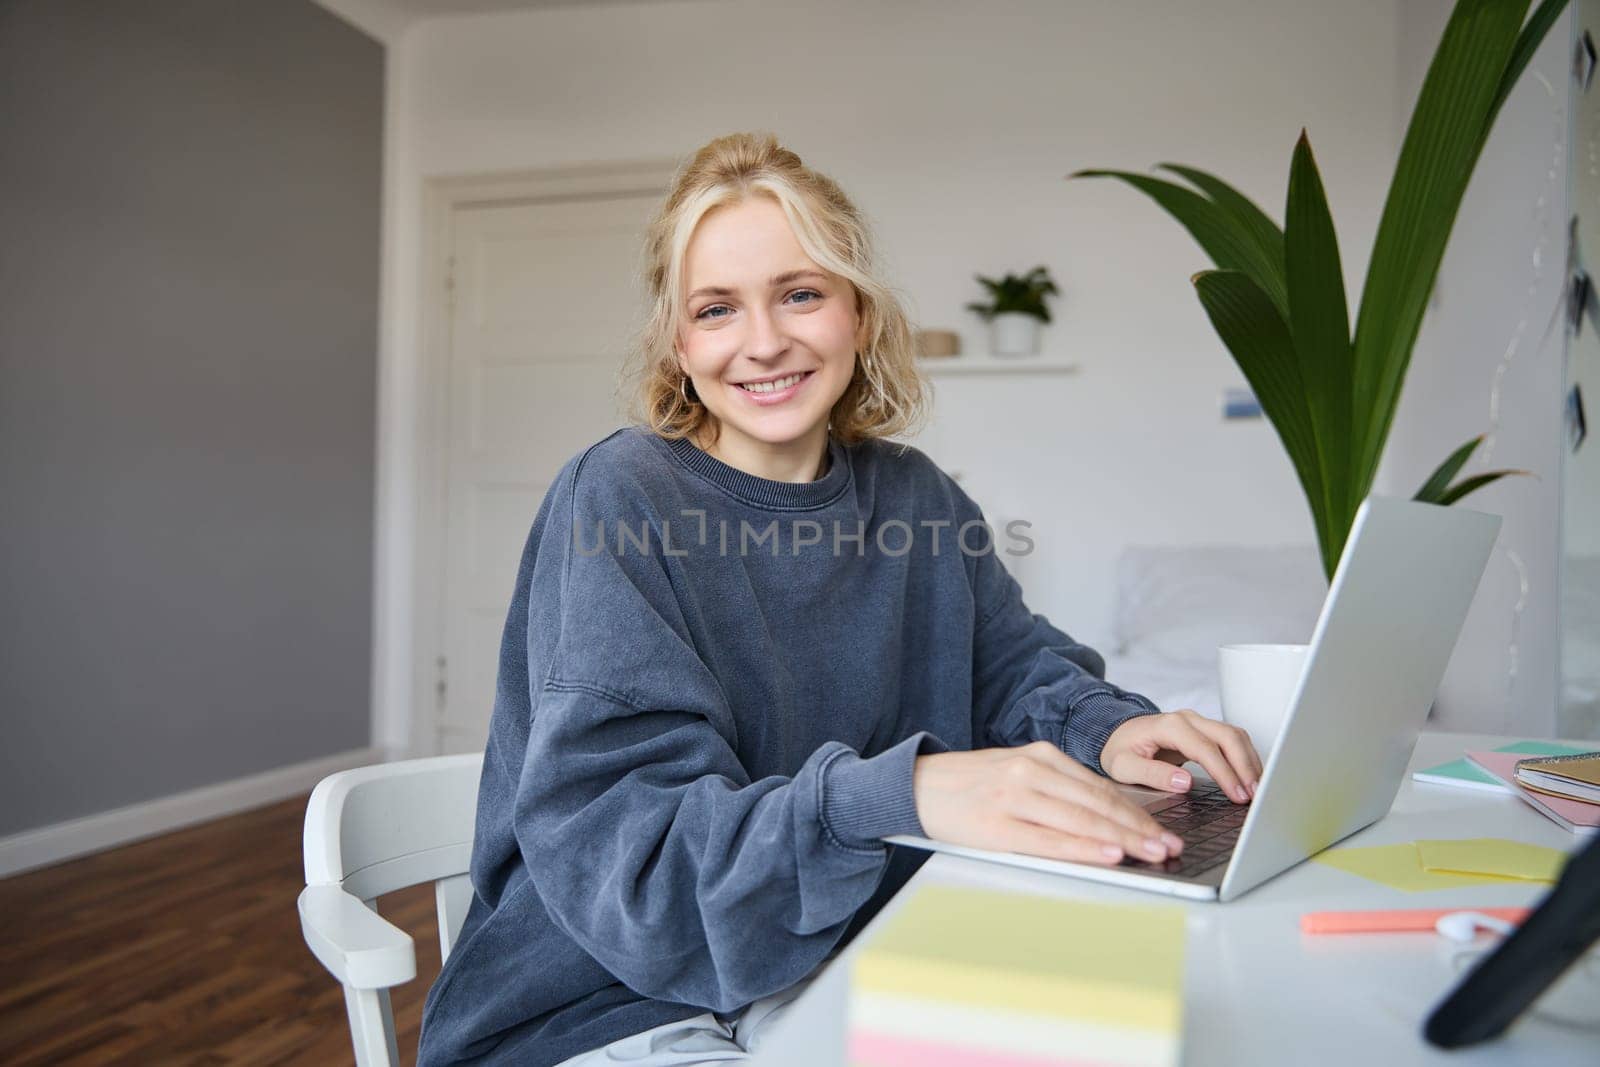 Portrait of smiling young woman, college student sits in her room, does homework, studies remotely from home, uses laptop for freelance work.